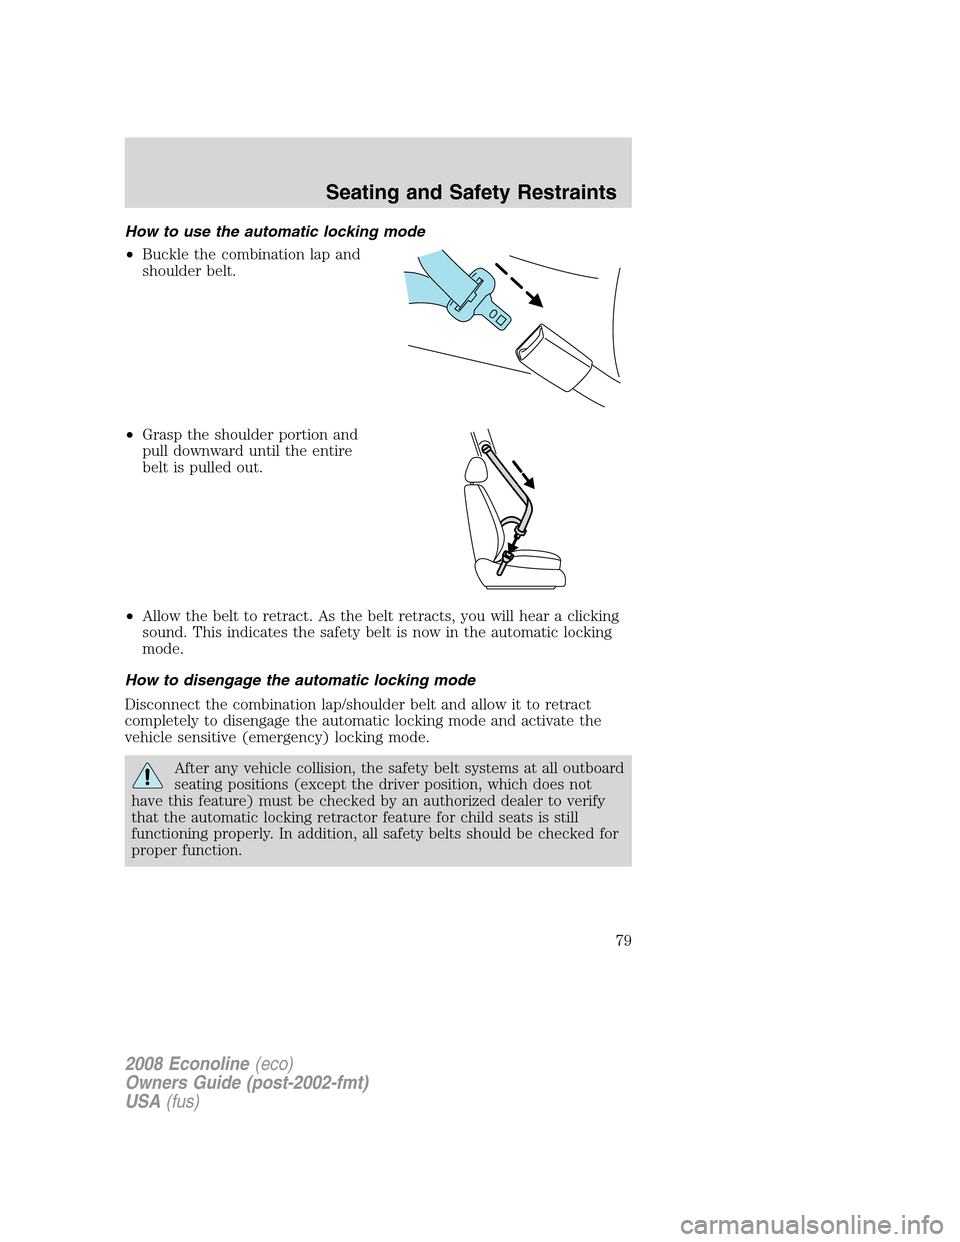 FORD E SERIES 2008 4.G Owners Manual How to use the automatic locking mode
•Buckle the combination lap and
shoulder belt.
•Grasp the shoulder portion and
pull downward until the entire
belt is pulled out.
•Allow the belt to retract